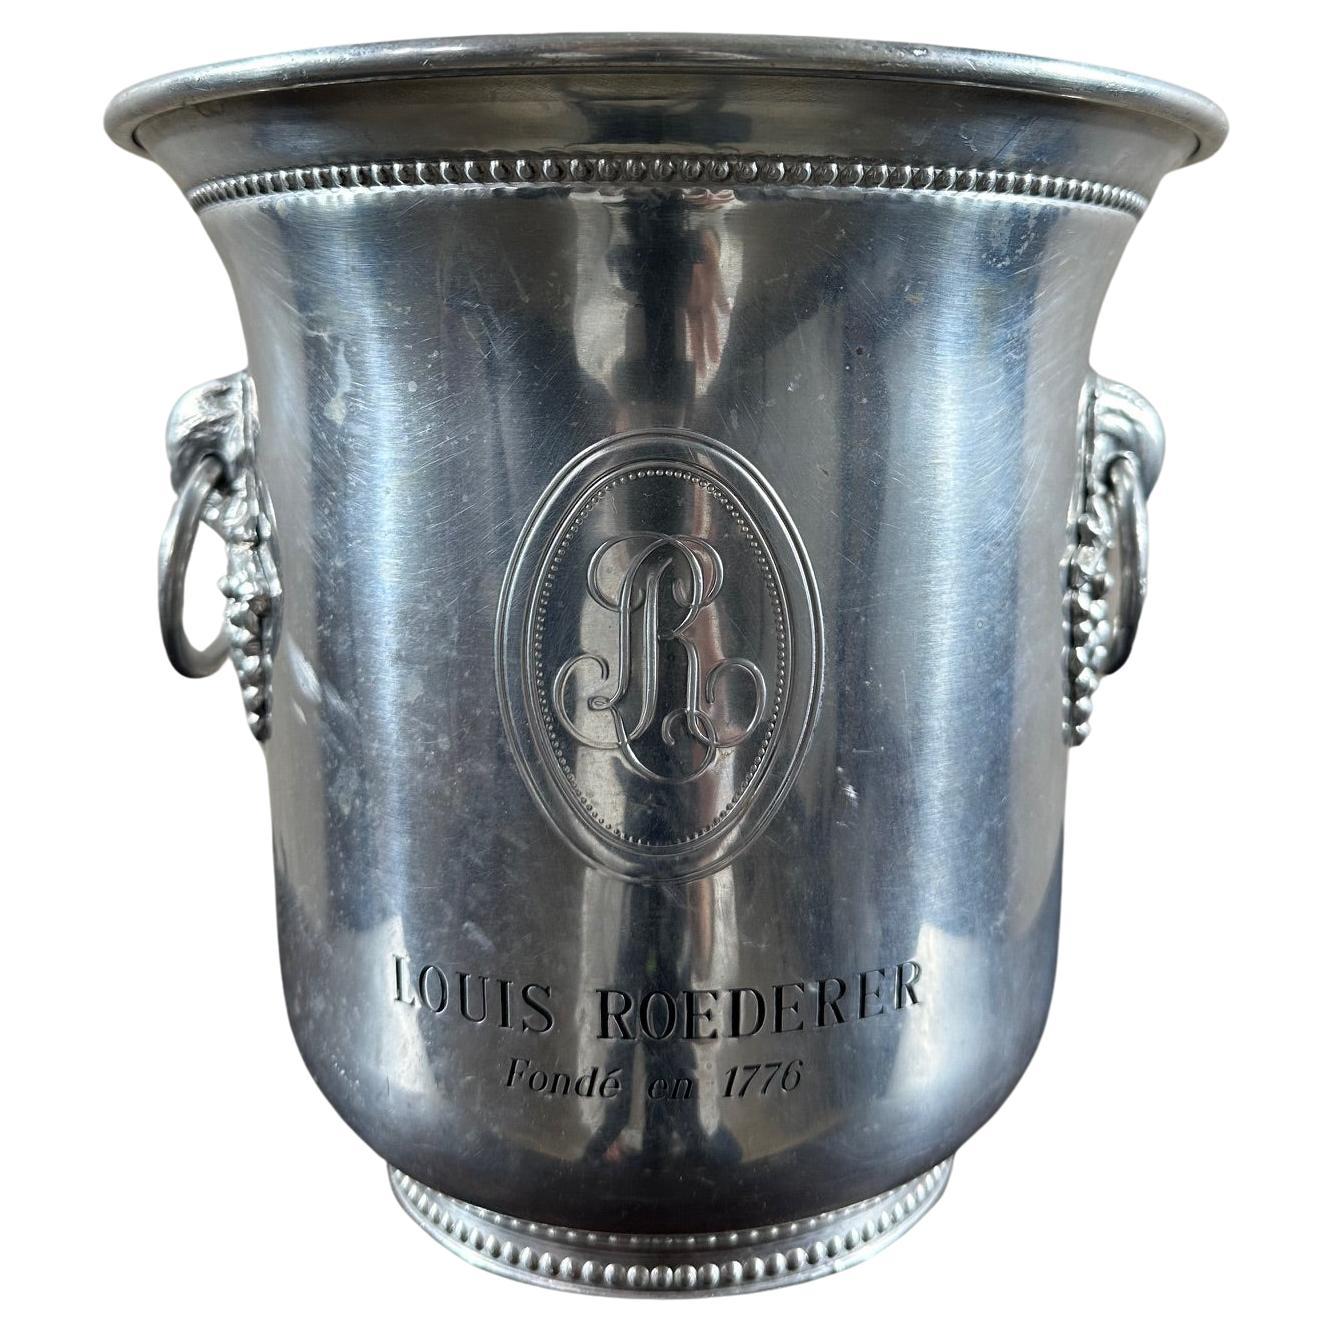 20th century French Art deco Silver Plated Louis Roederer Champagne Cooler